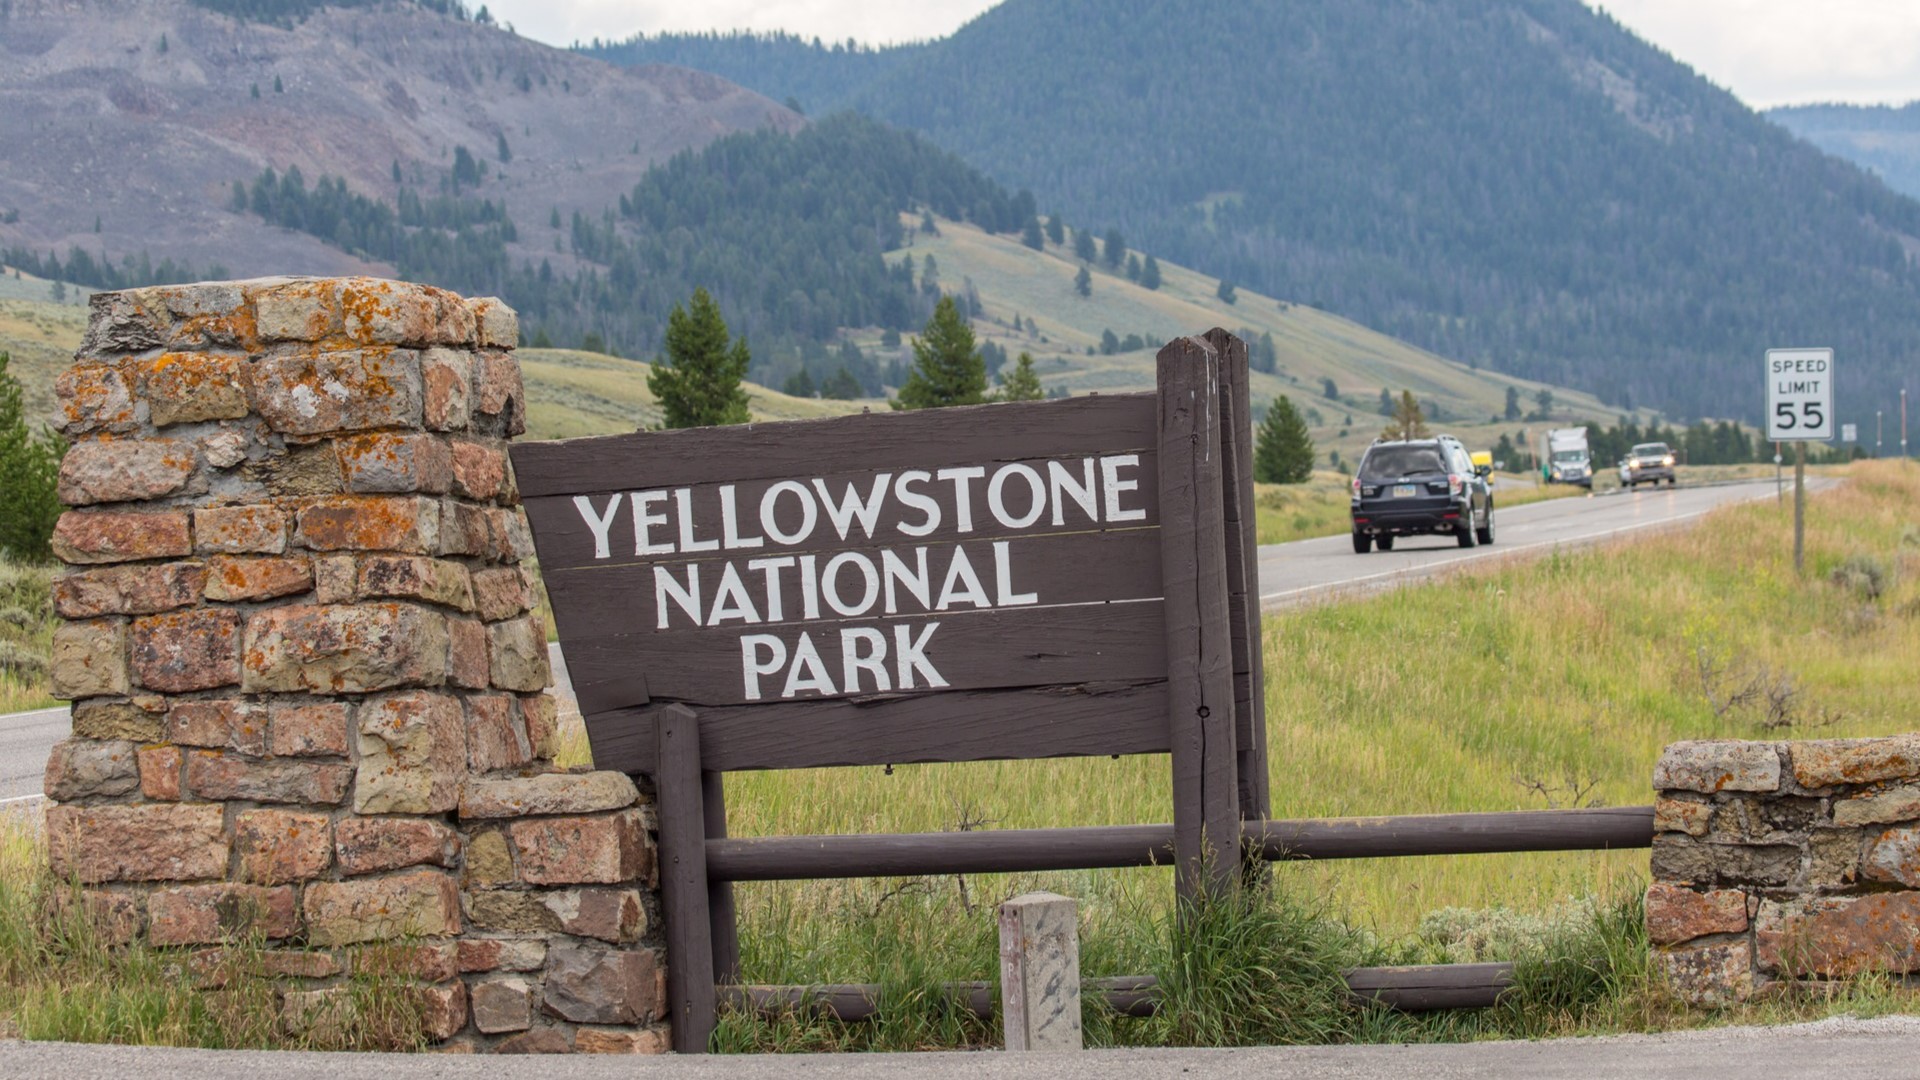 Officials said one person is dead and a ranger is in the hospital after a shooting at Canyon Village in the central part of Yellowstone National Park.